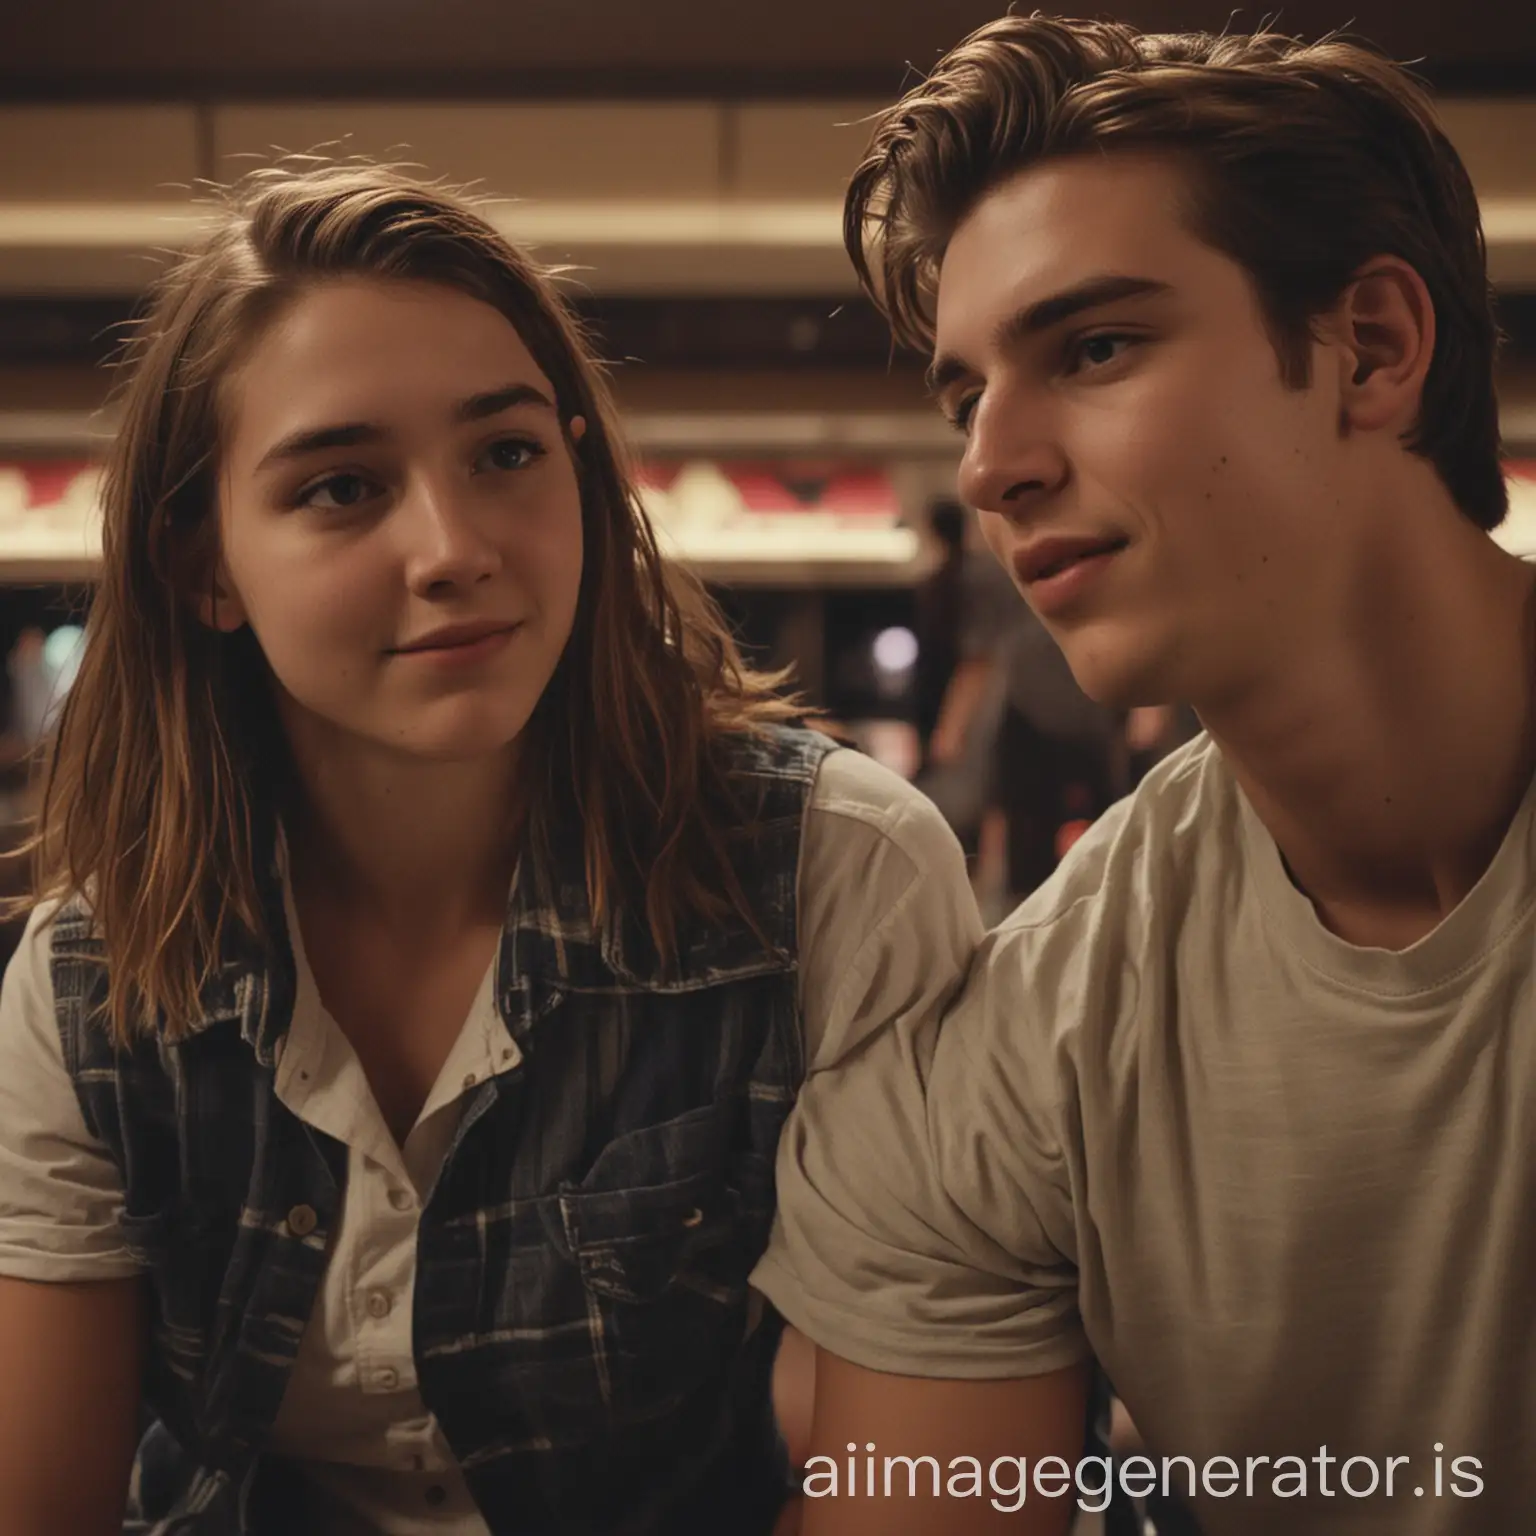 Young-Couple-in-Intimate-Bowling-Moment